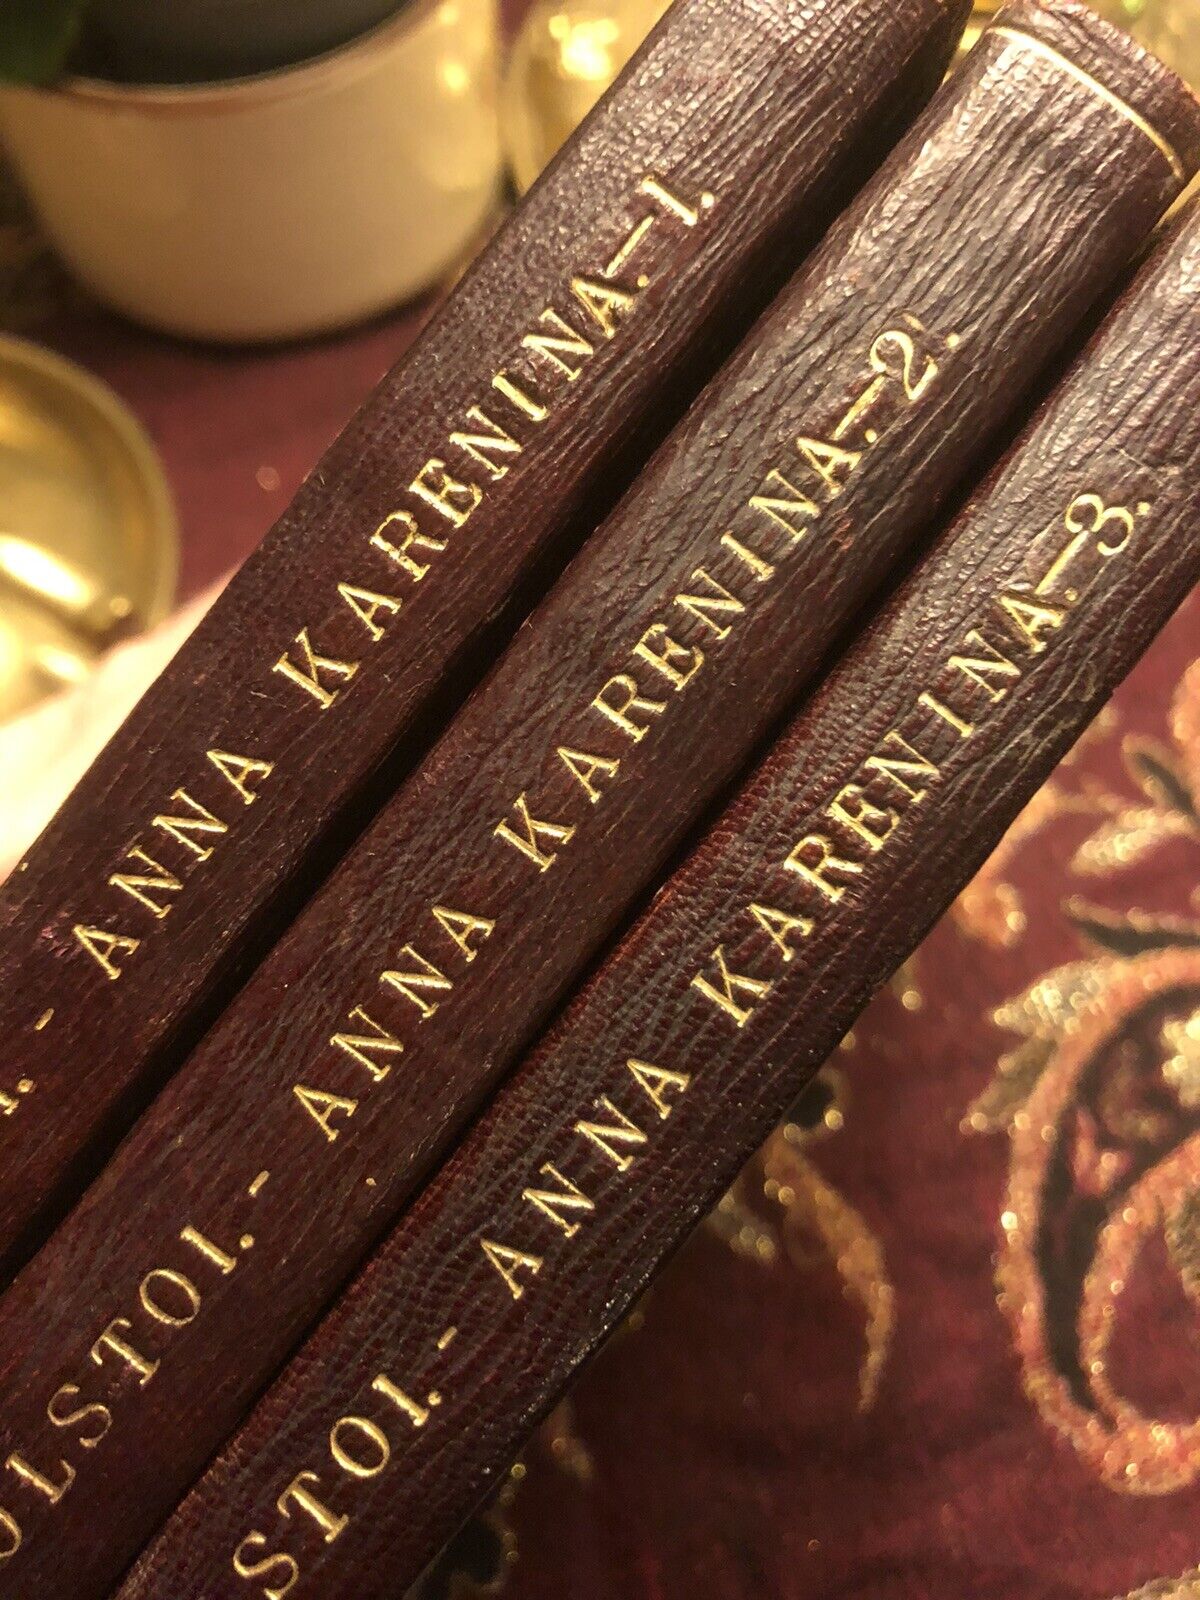 Publication　Gently　Tolstoy　Anna　The　Vols)　–　Shop　1886　(3　Russian　Karenina　Leo　Book　Scarce　Mad